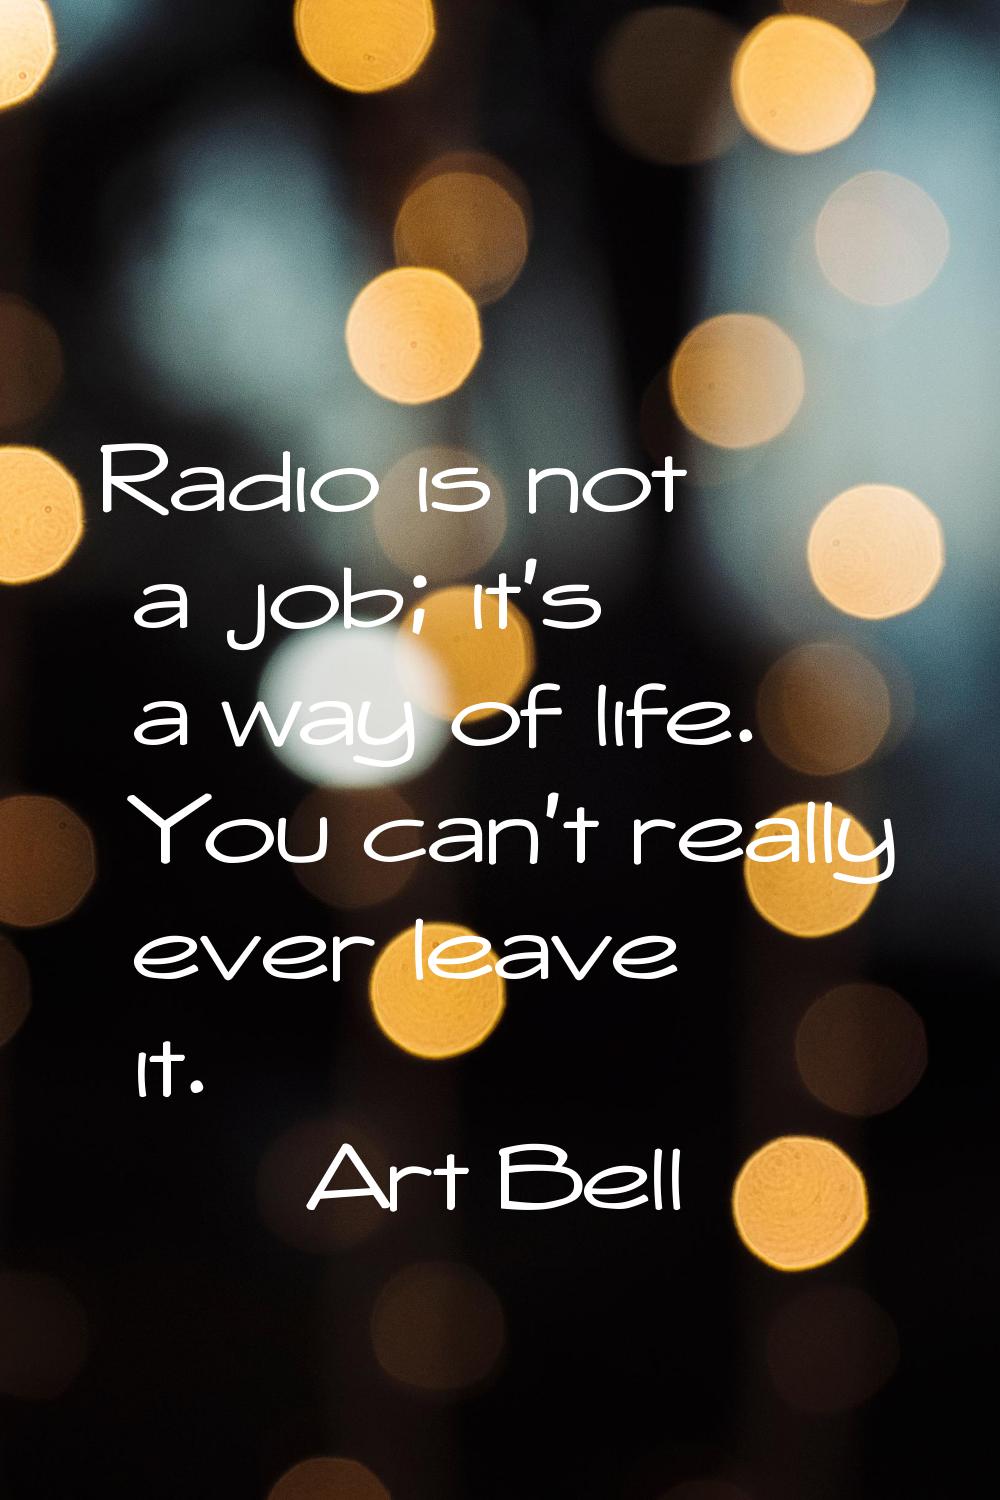 Radio is not a job; it's a way of life. You can't really ever leave it.